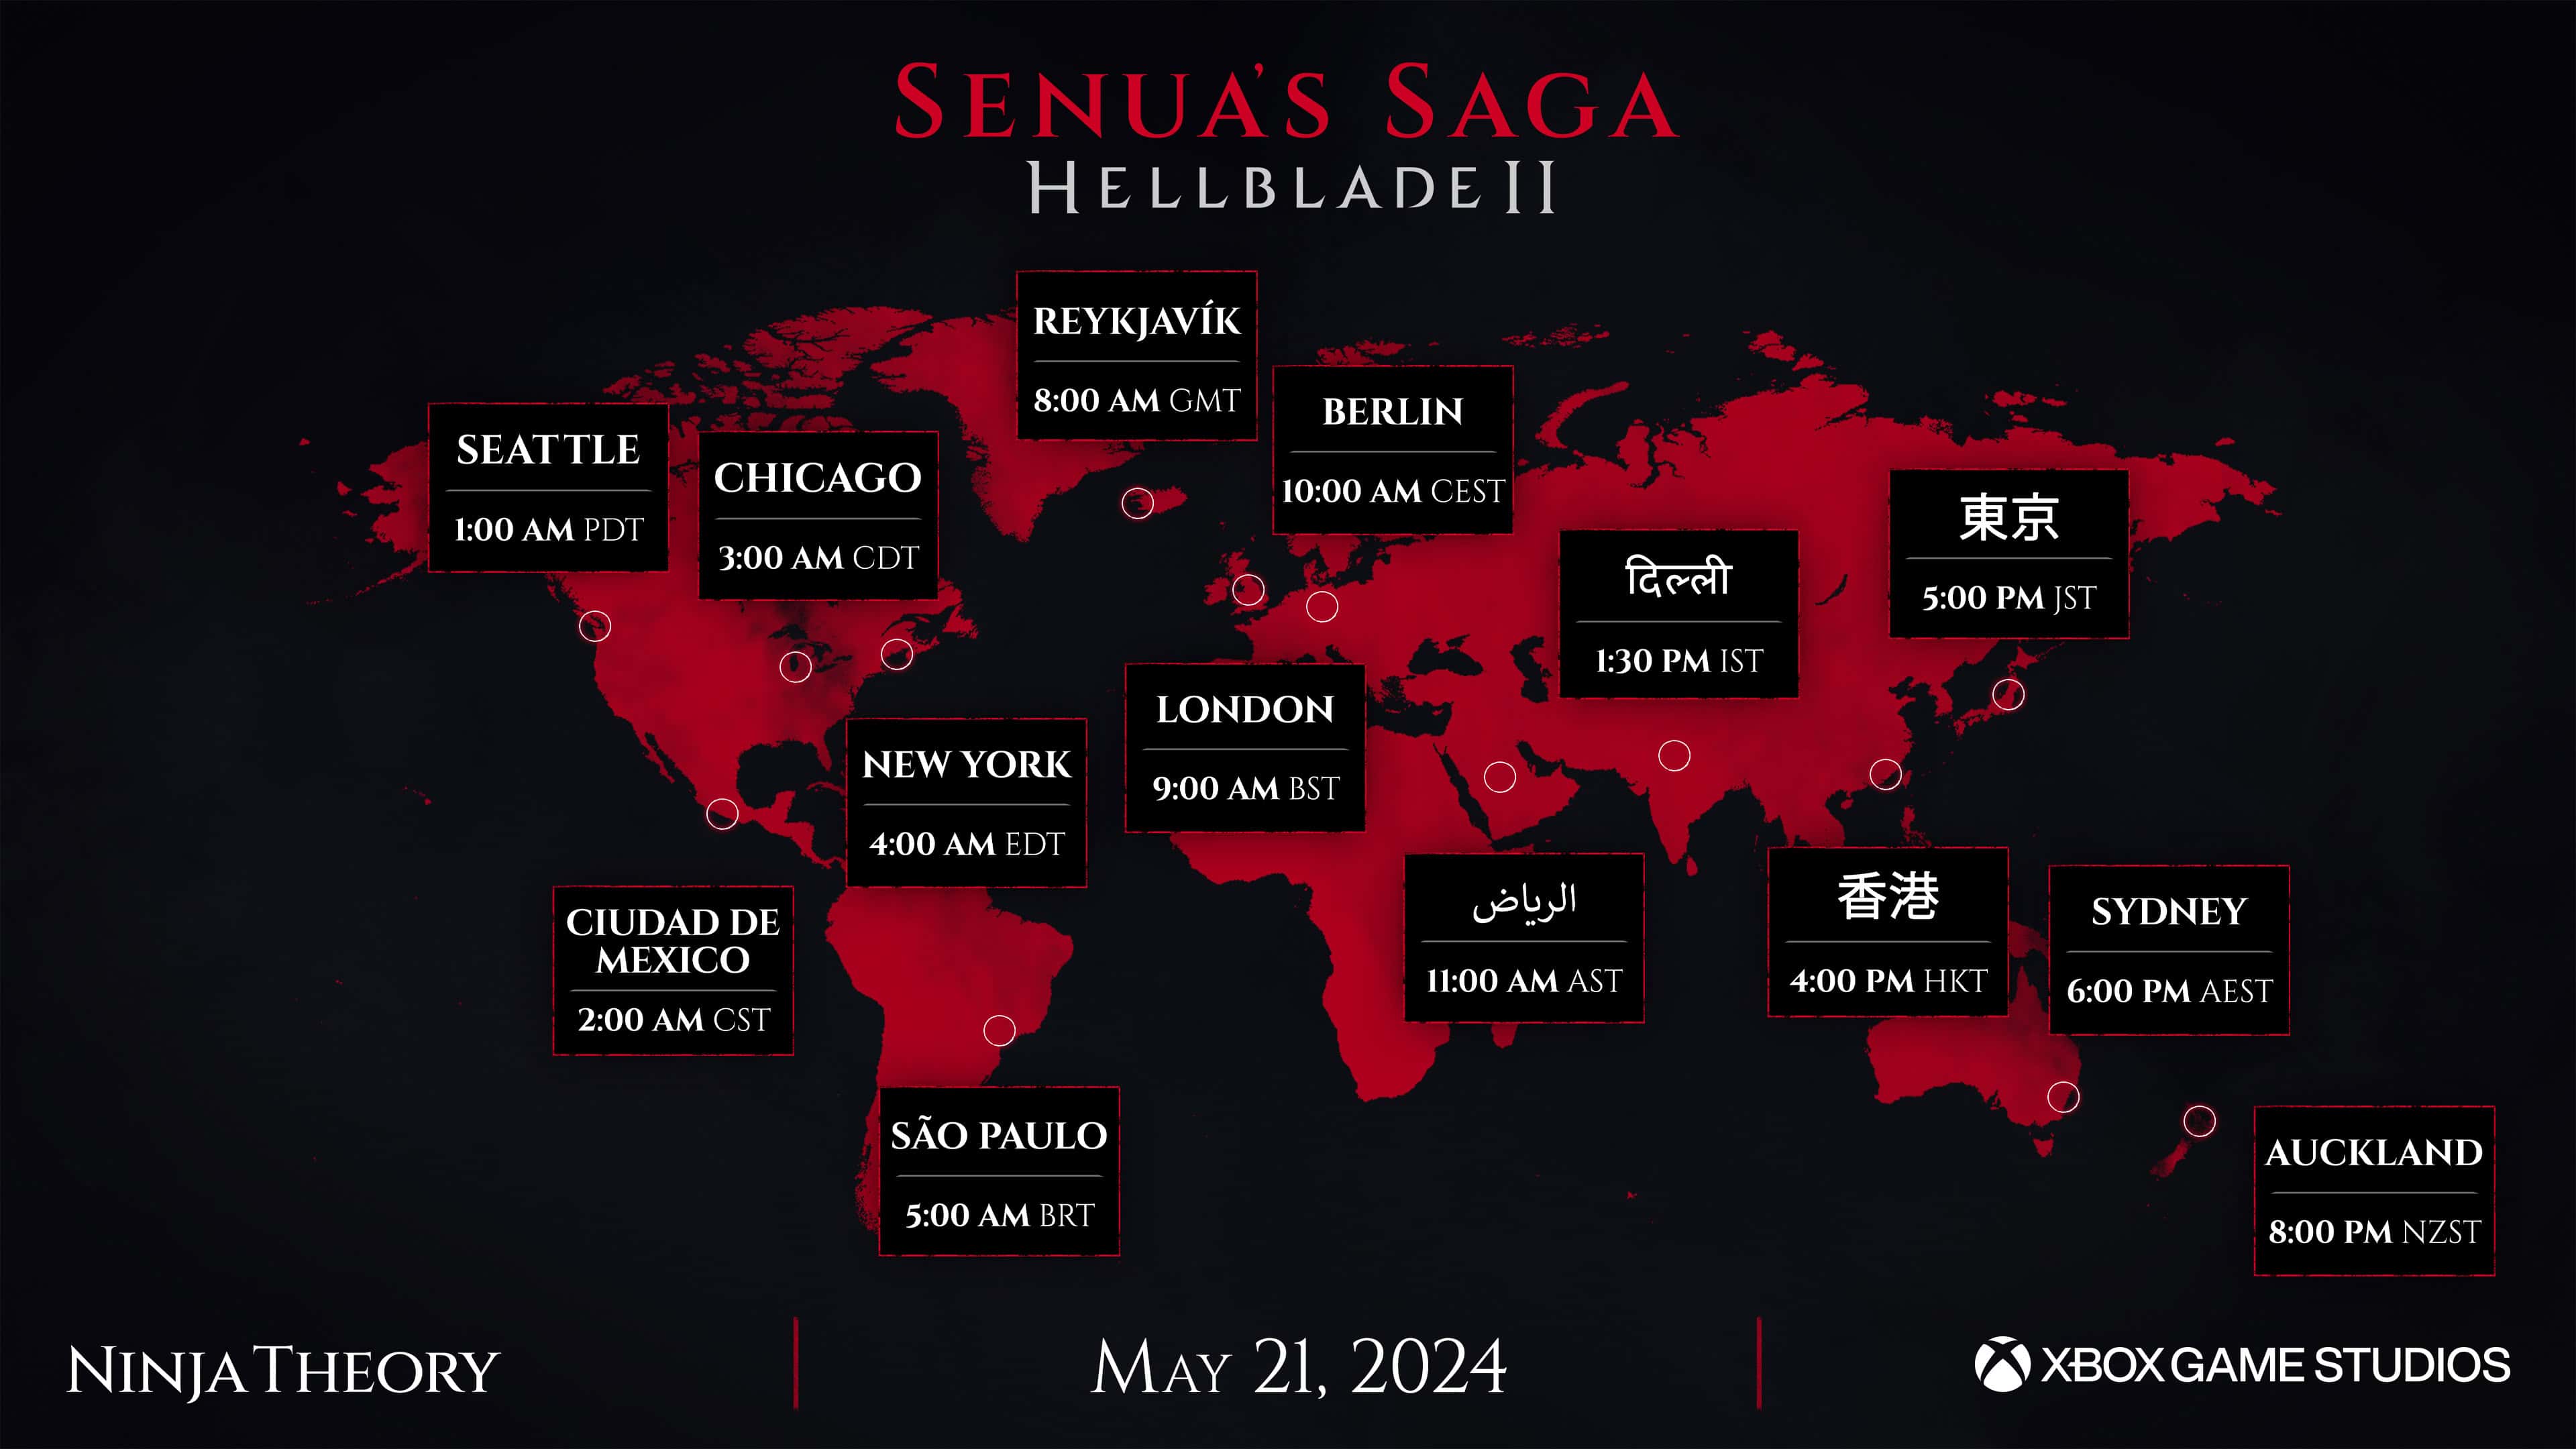 hellblade 2 release time - a map of the world showing different time zones